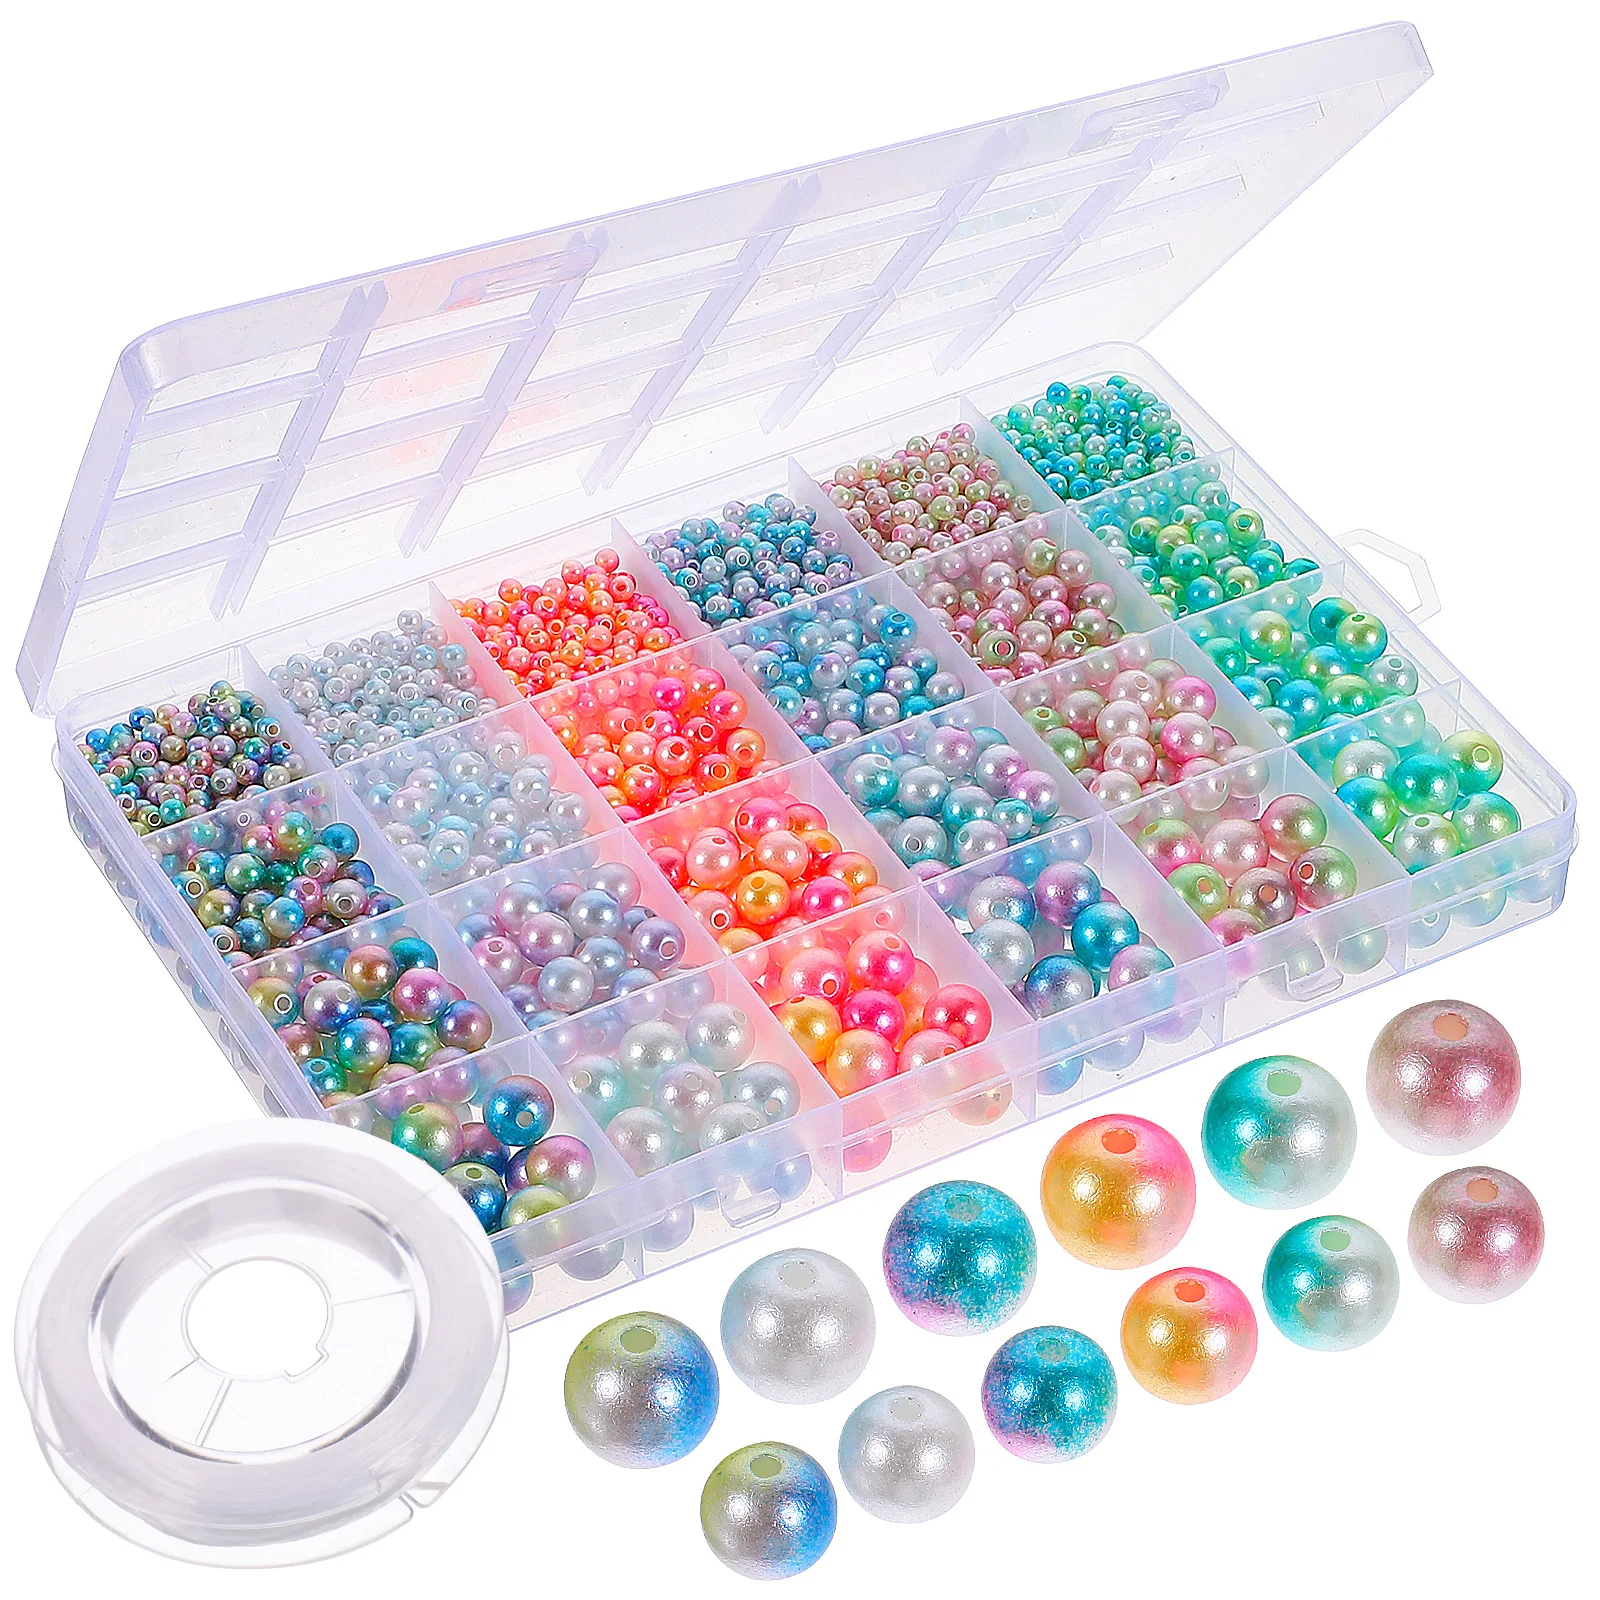 

1890 Pcs Pearl DIY Set Small Beads Holes Adult Crafts Jewelry Kit Imitation Pearls Making Loose Charms Child Kids Necklace